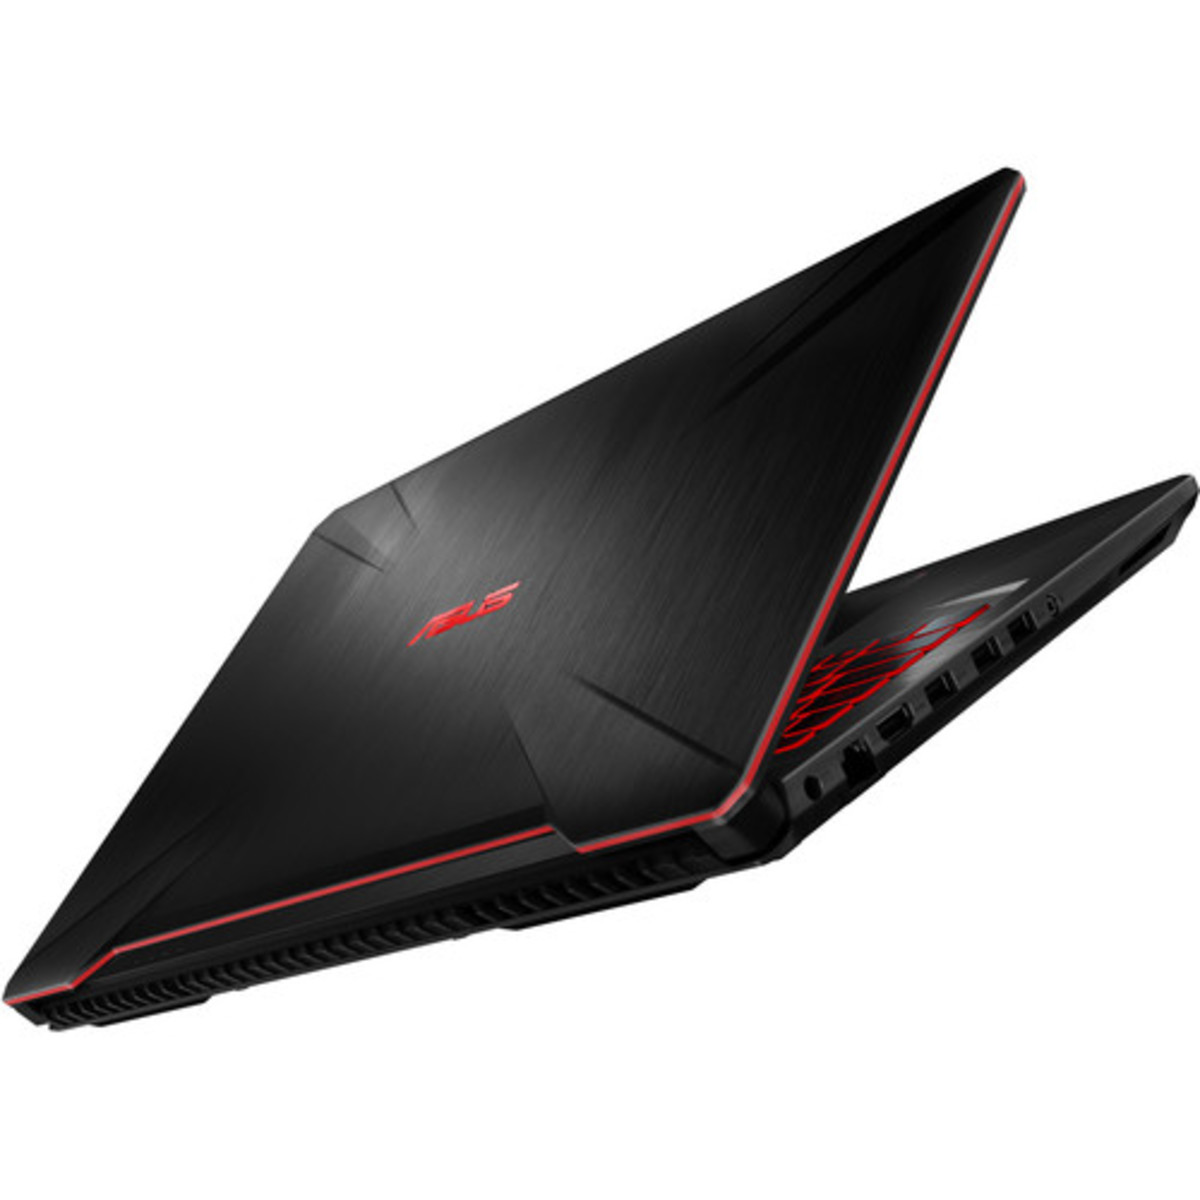 Asus Gaming Notebook FX504GD-DM812T Core i7 Red